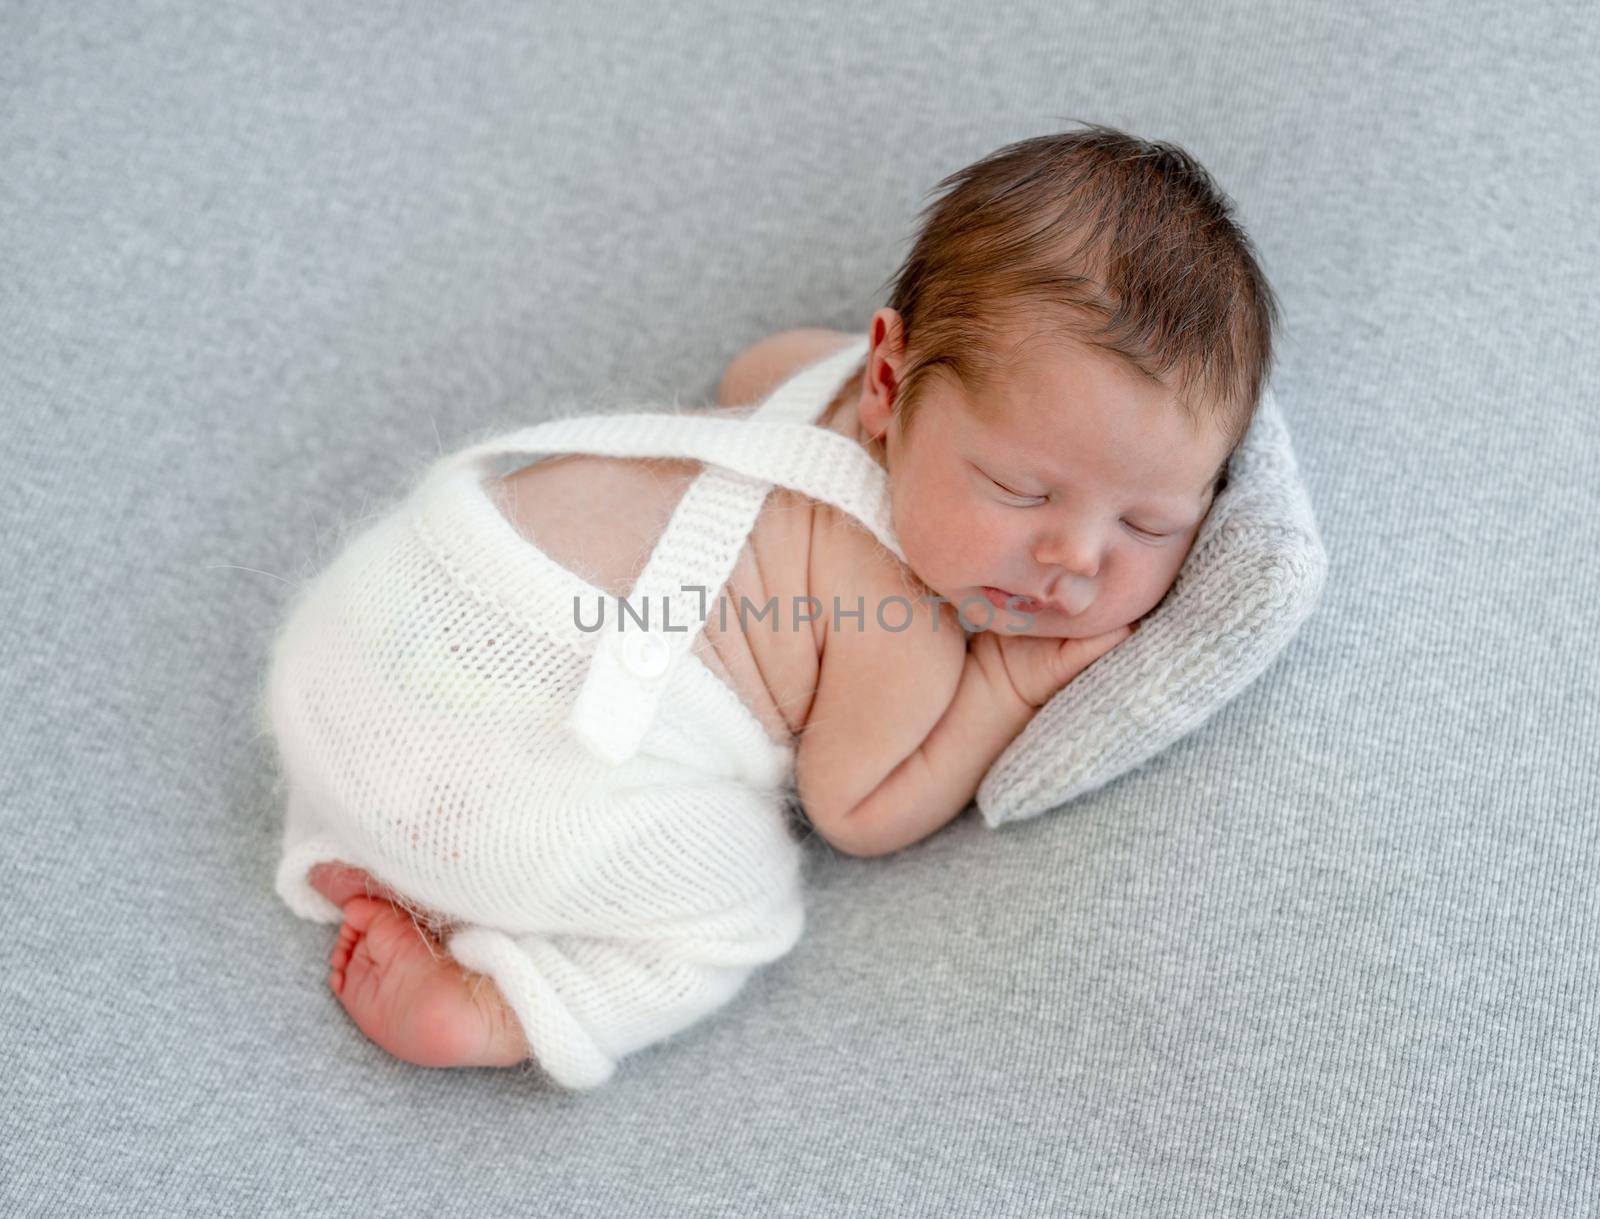 Newborn baby boy sleeping wearing knitted white costume and holding his hands under cheeks. Cute infant kid studio portrait with pillow